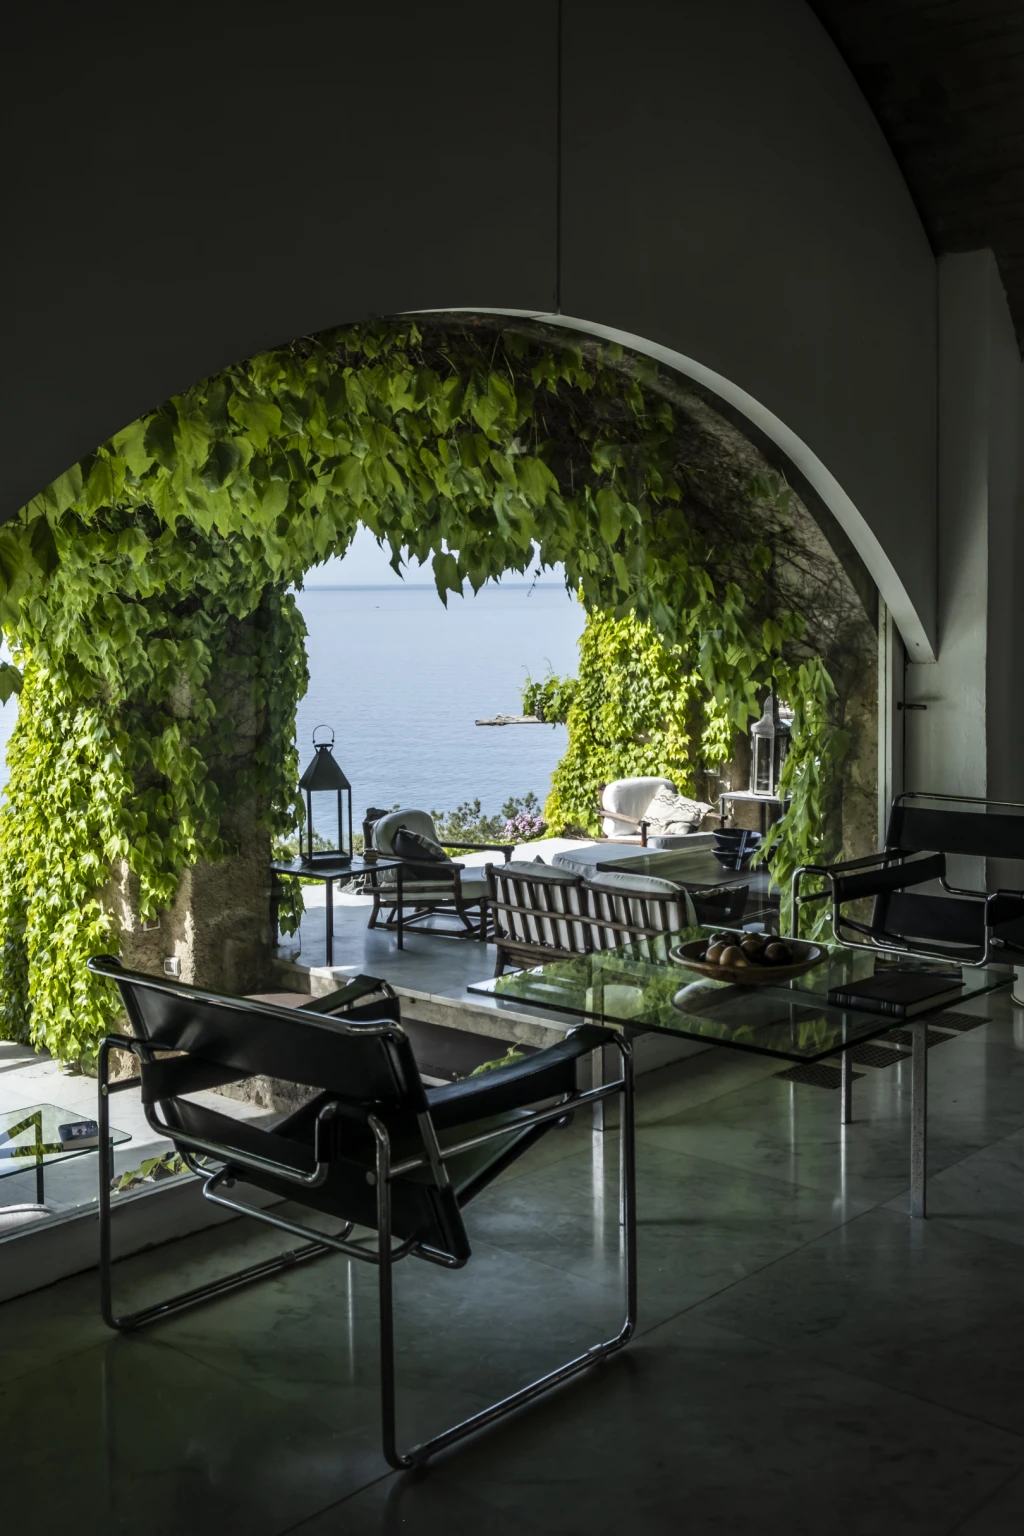 a unique private retreat surrounded by lemon trees and the most beautiful views of the Mediterranean.